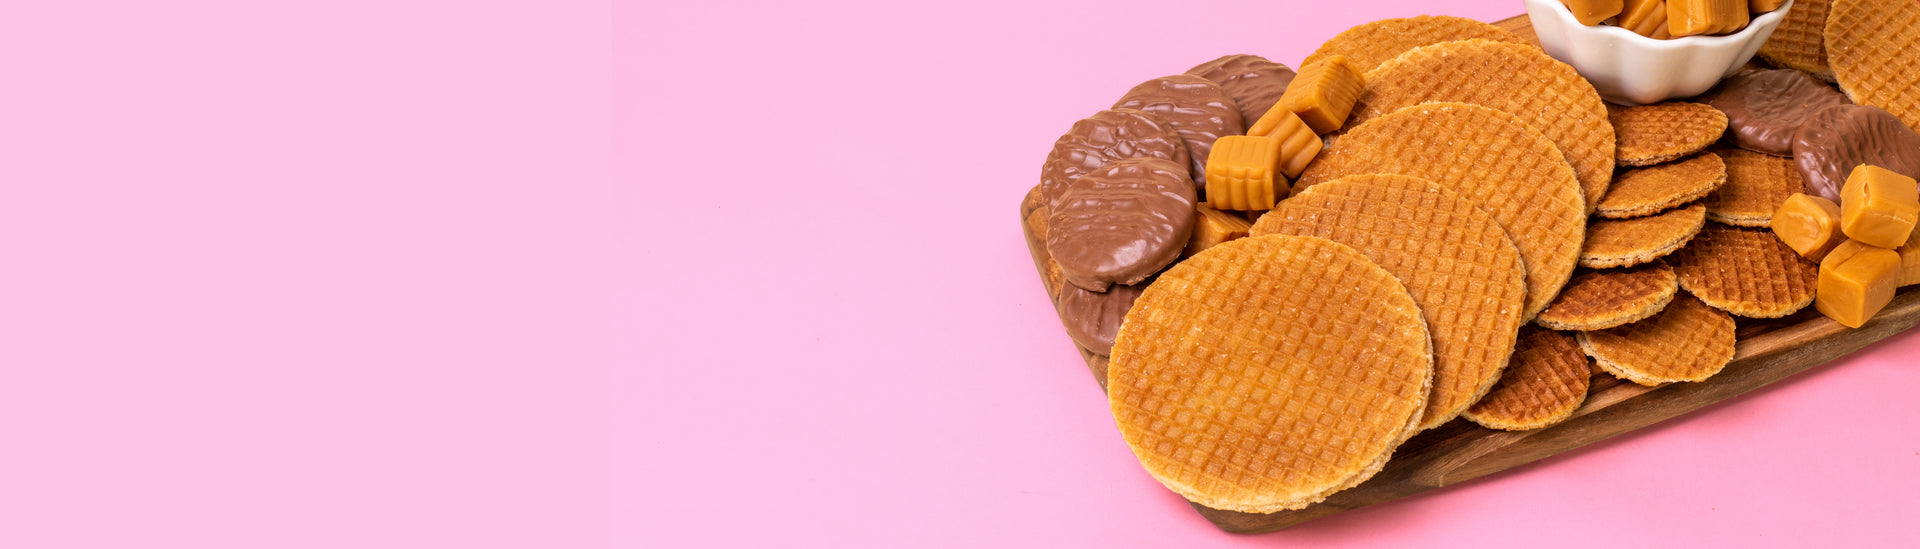 HOW TO EAT A STROOPWAFEL: THE 5 MOST DELICIOUS WAYS